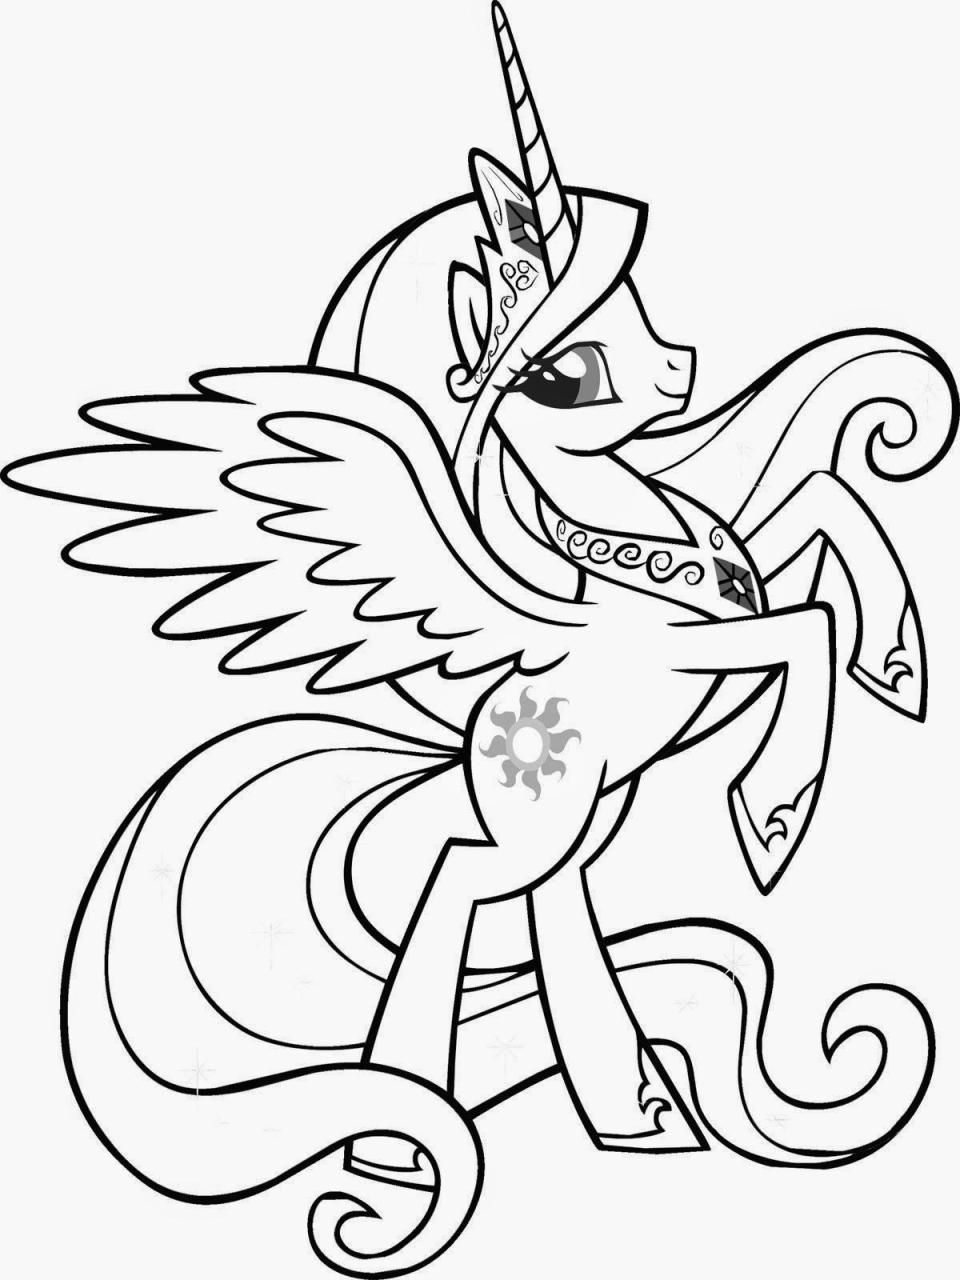 Free Unicorn Coloring Pages Online, Download Free Unicorn Coloring